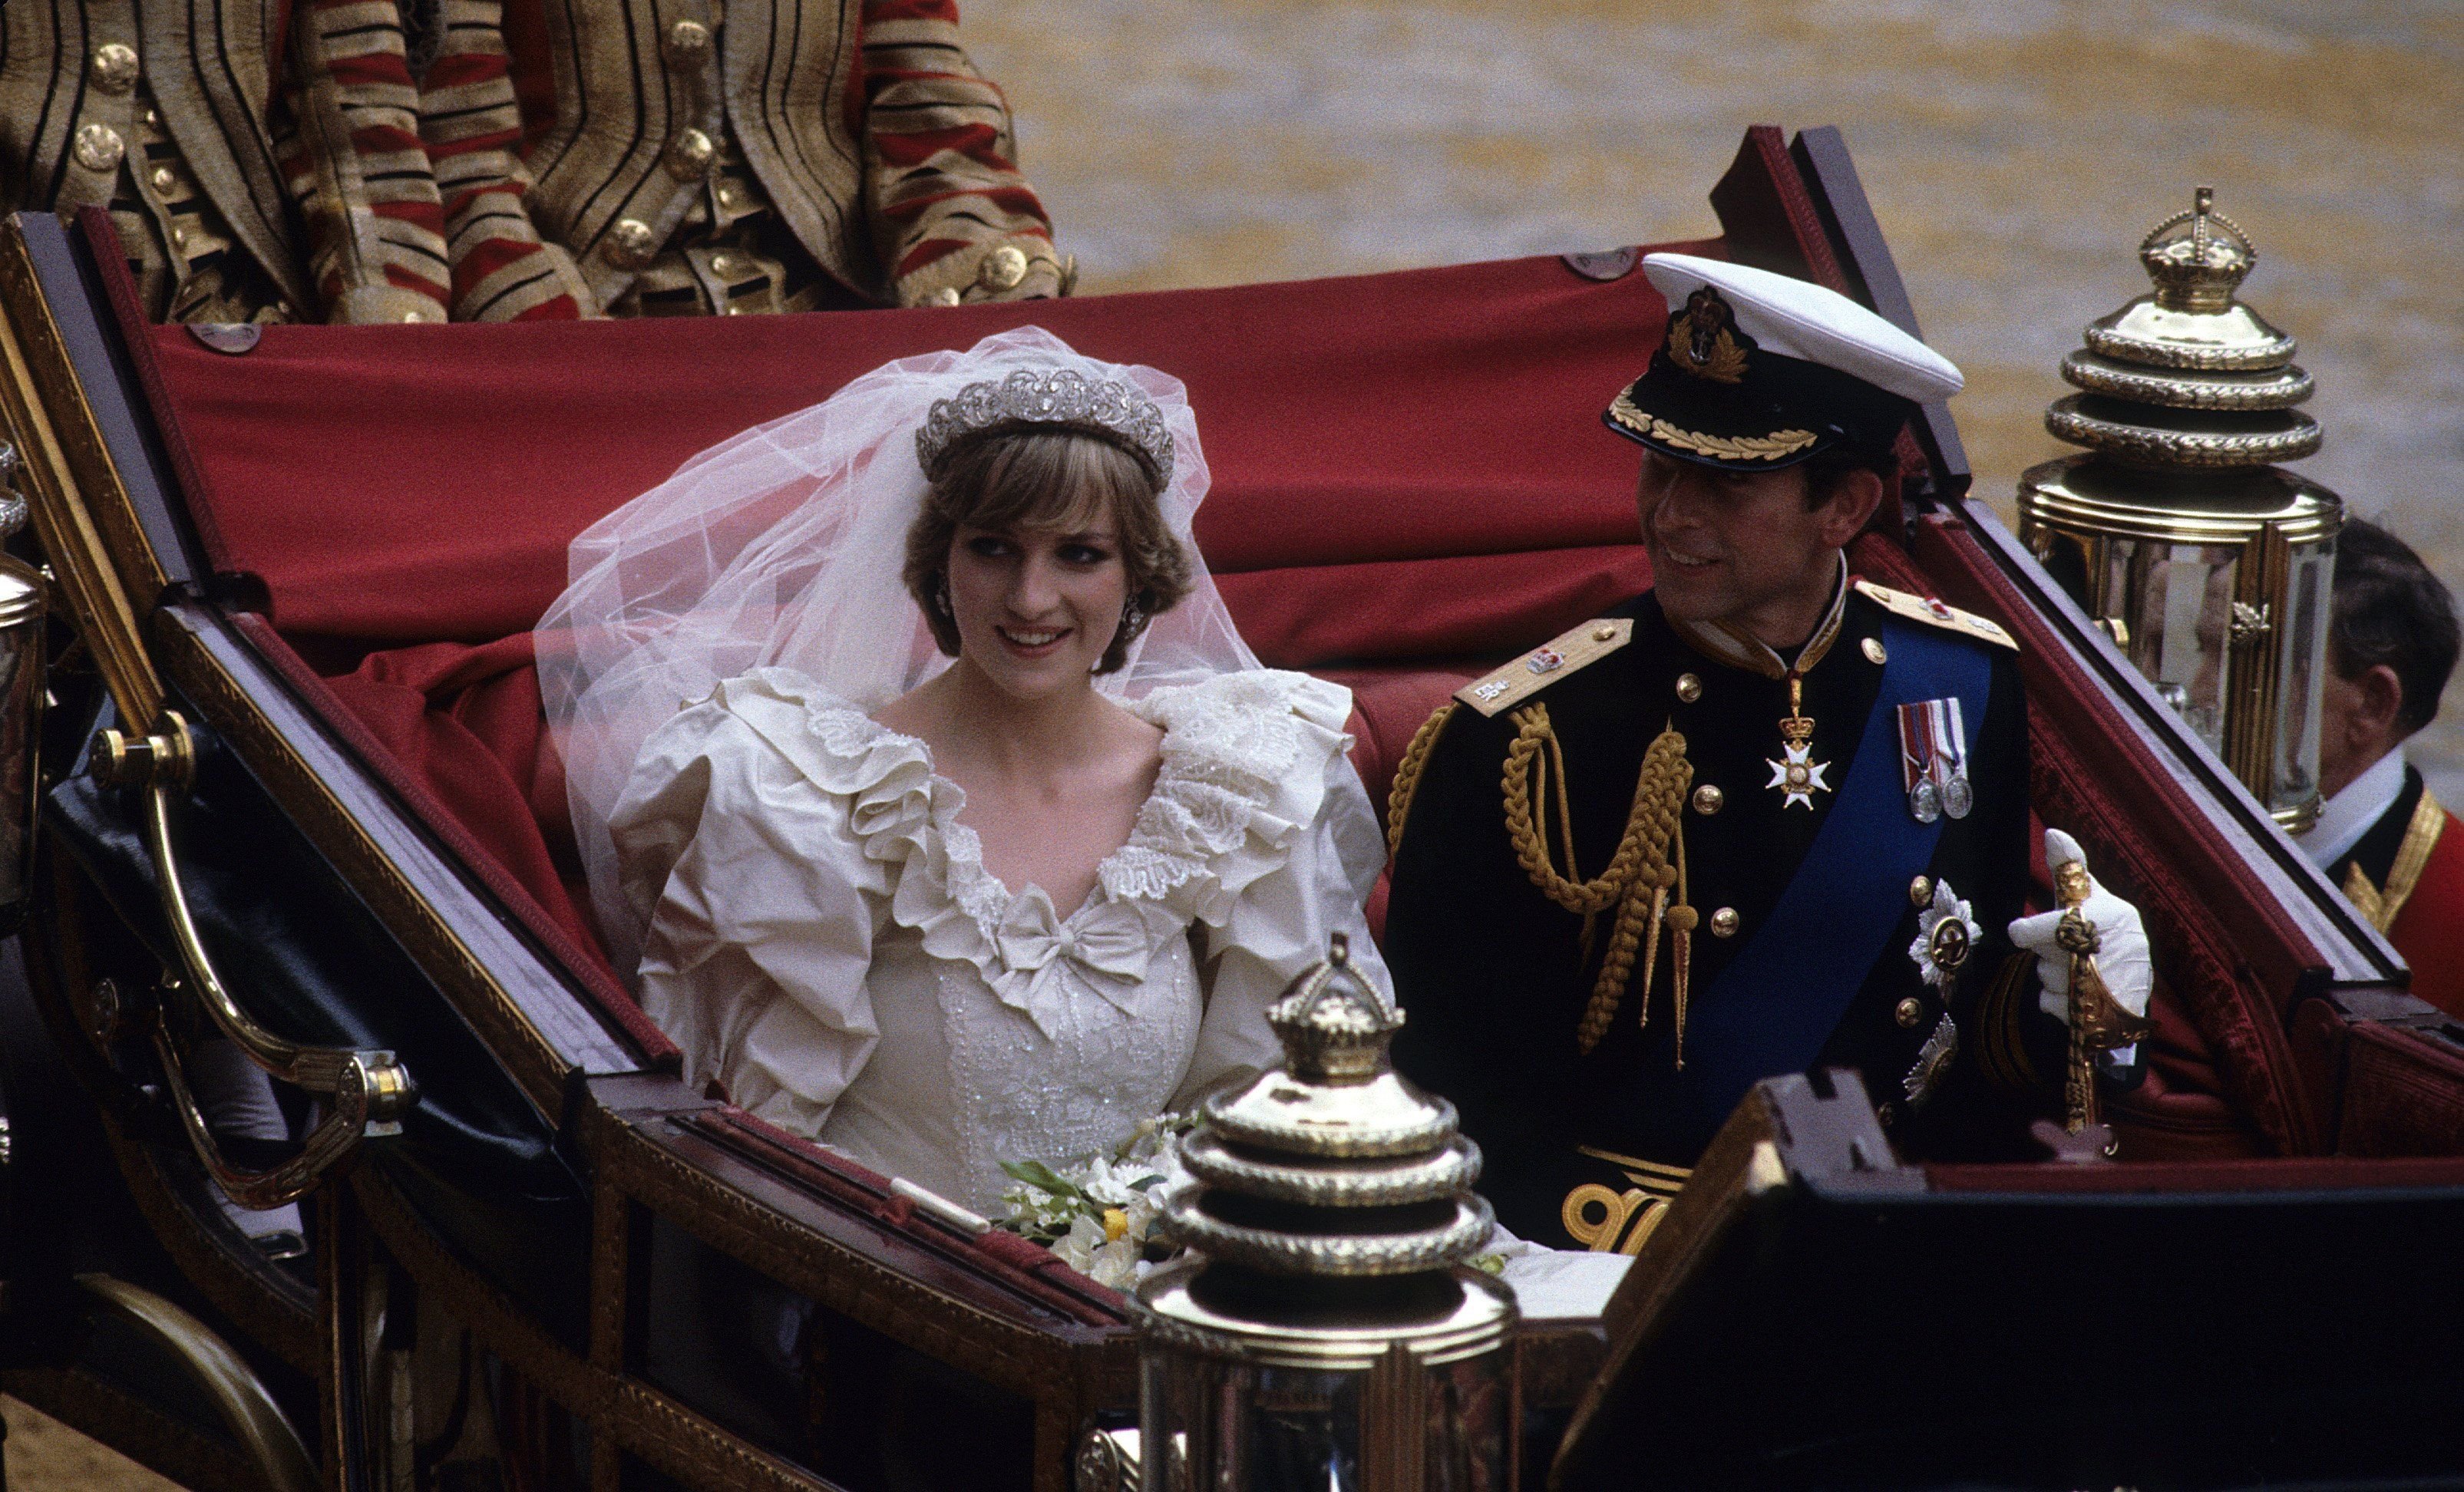 Prince Charles and Princess Diana at their wedding in 1980 | Source: Getty Images